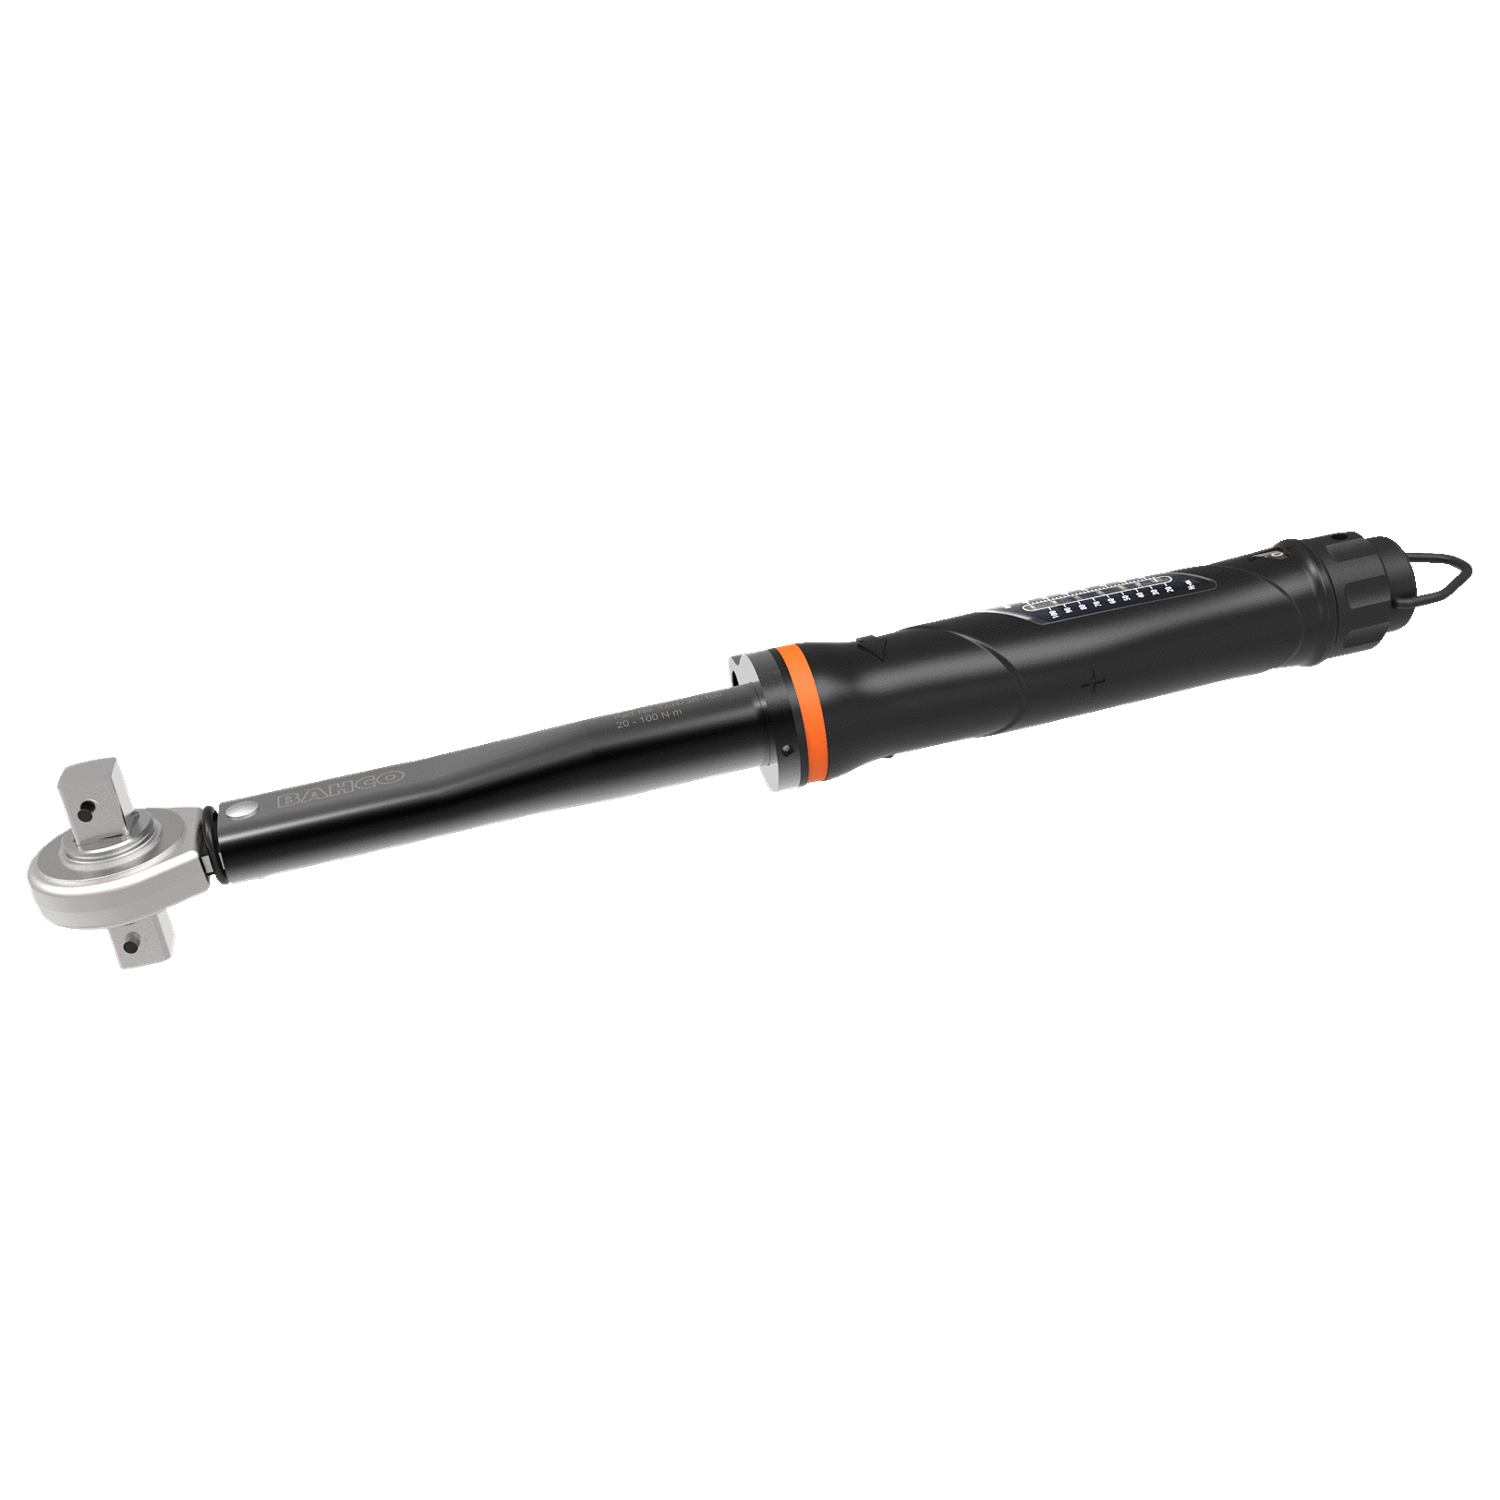 BAHCO TAH73R Mechanical Adjustable Torque Wrench (BAHCO Tools) - Premium Torque Wrench from BAHCO - Shop now at Yew Aik.